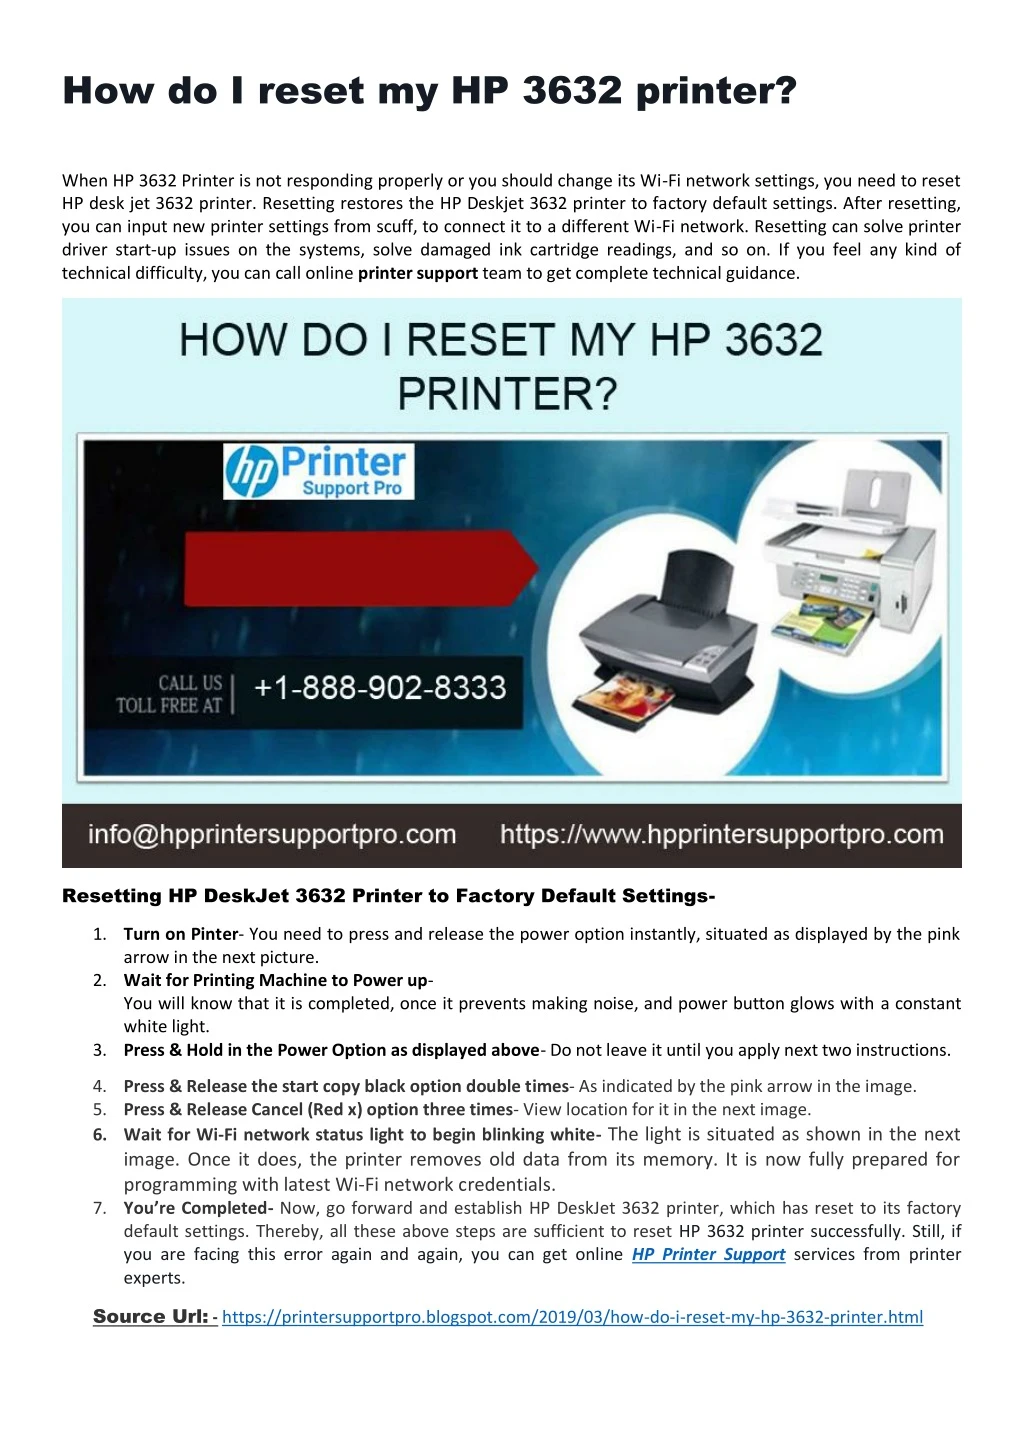 how do i reset my hp 3632 printer when hp 3632